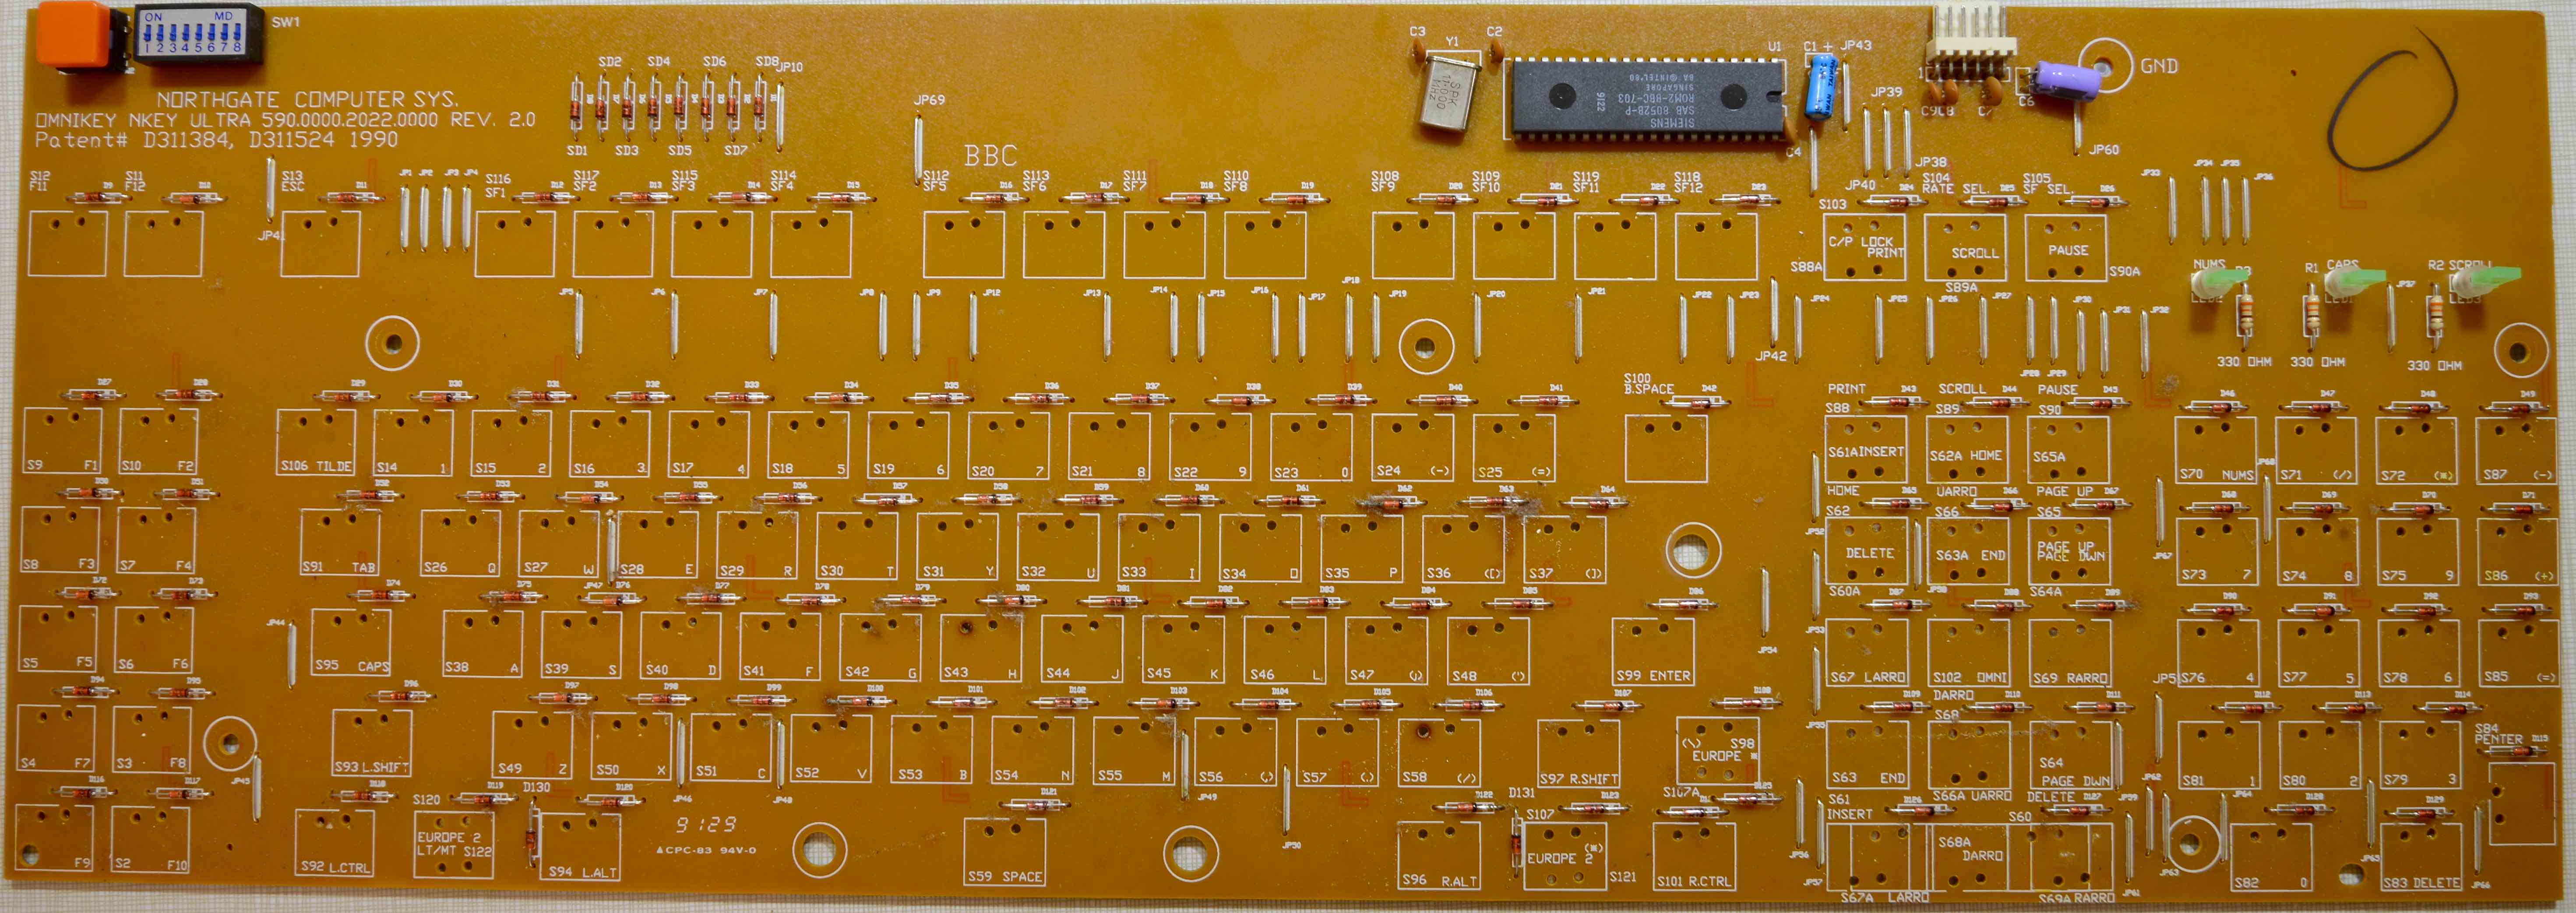 Northgate Omnikey Ultra PCB - front.